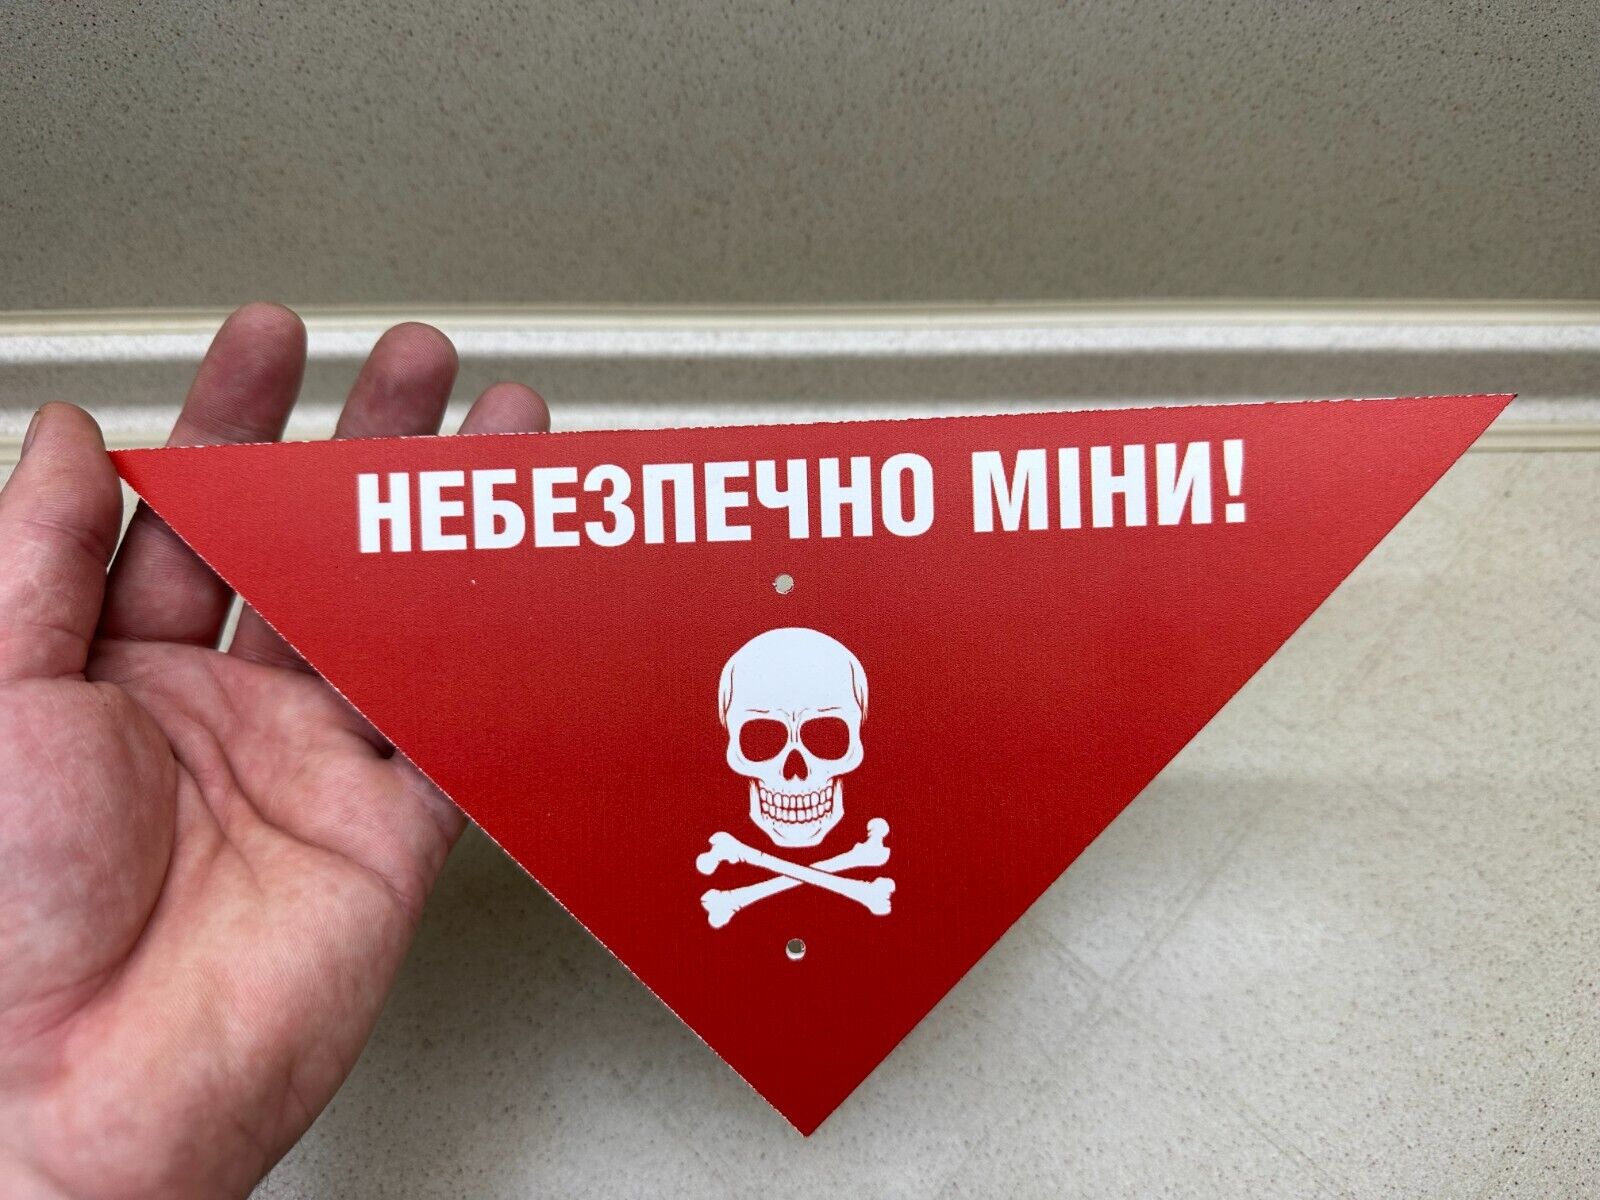 UKRAINE 2022 Caution sign Watch out for mines